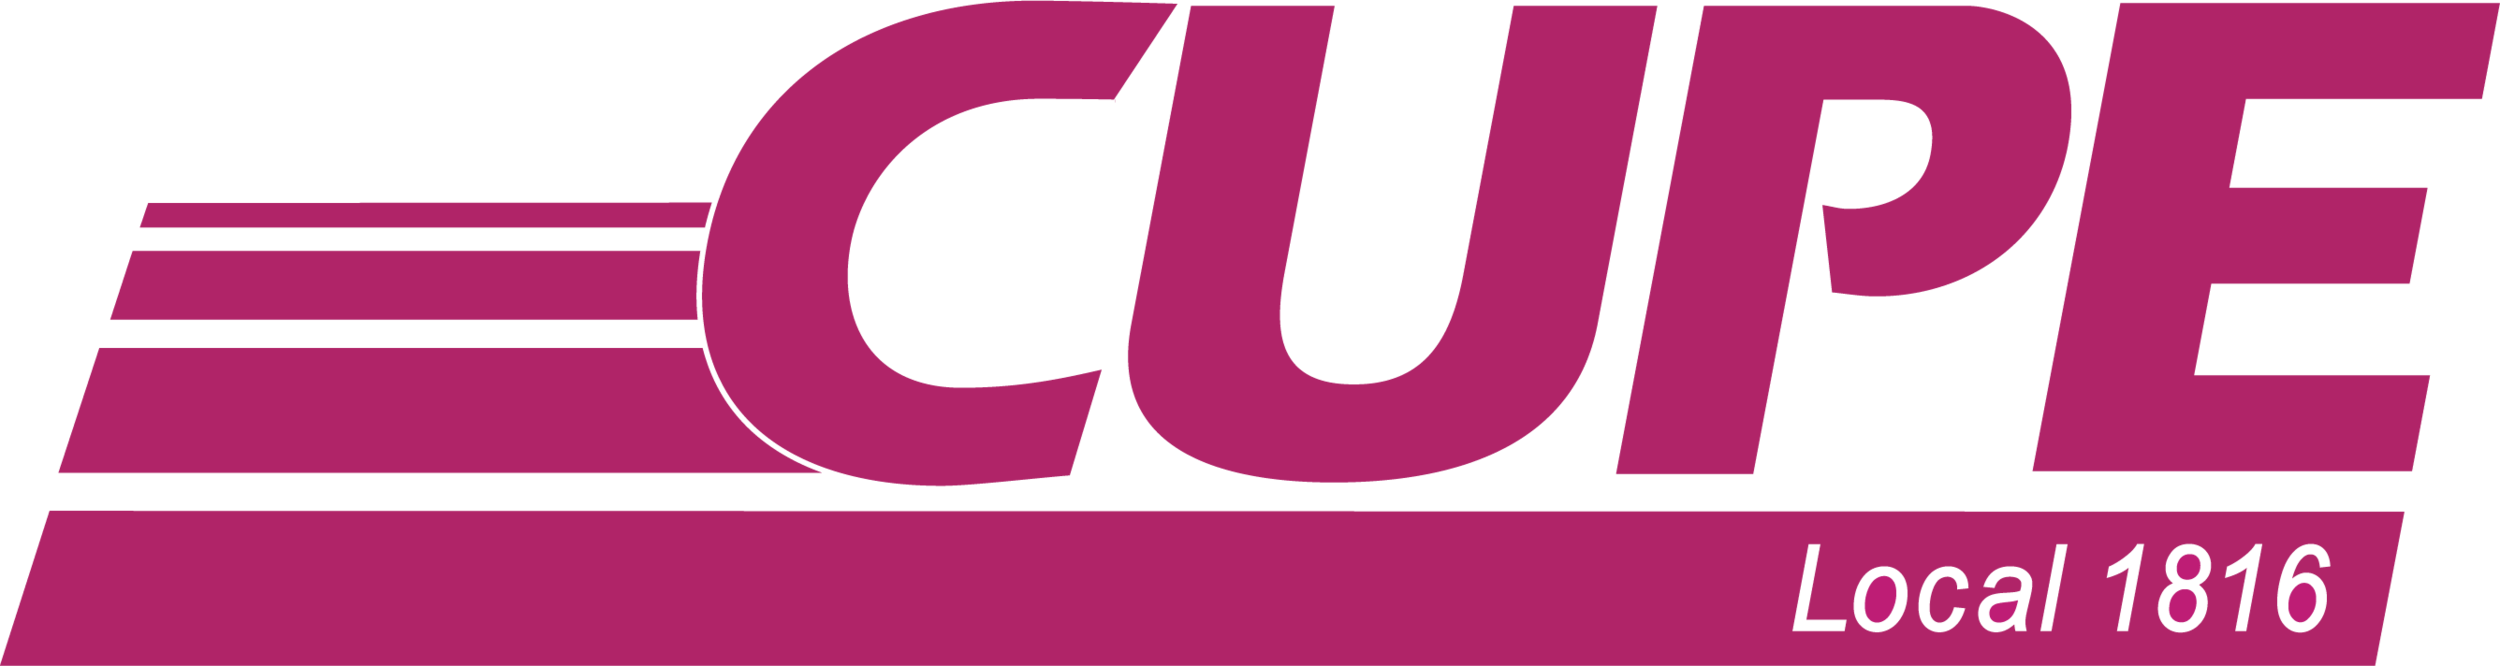 CUPE_1816_RGB-01.png